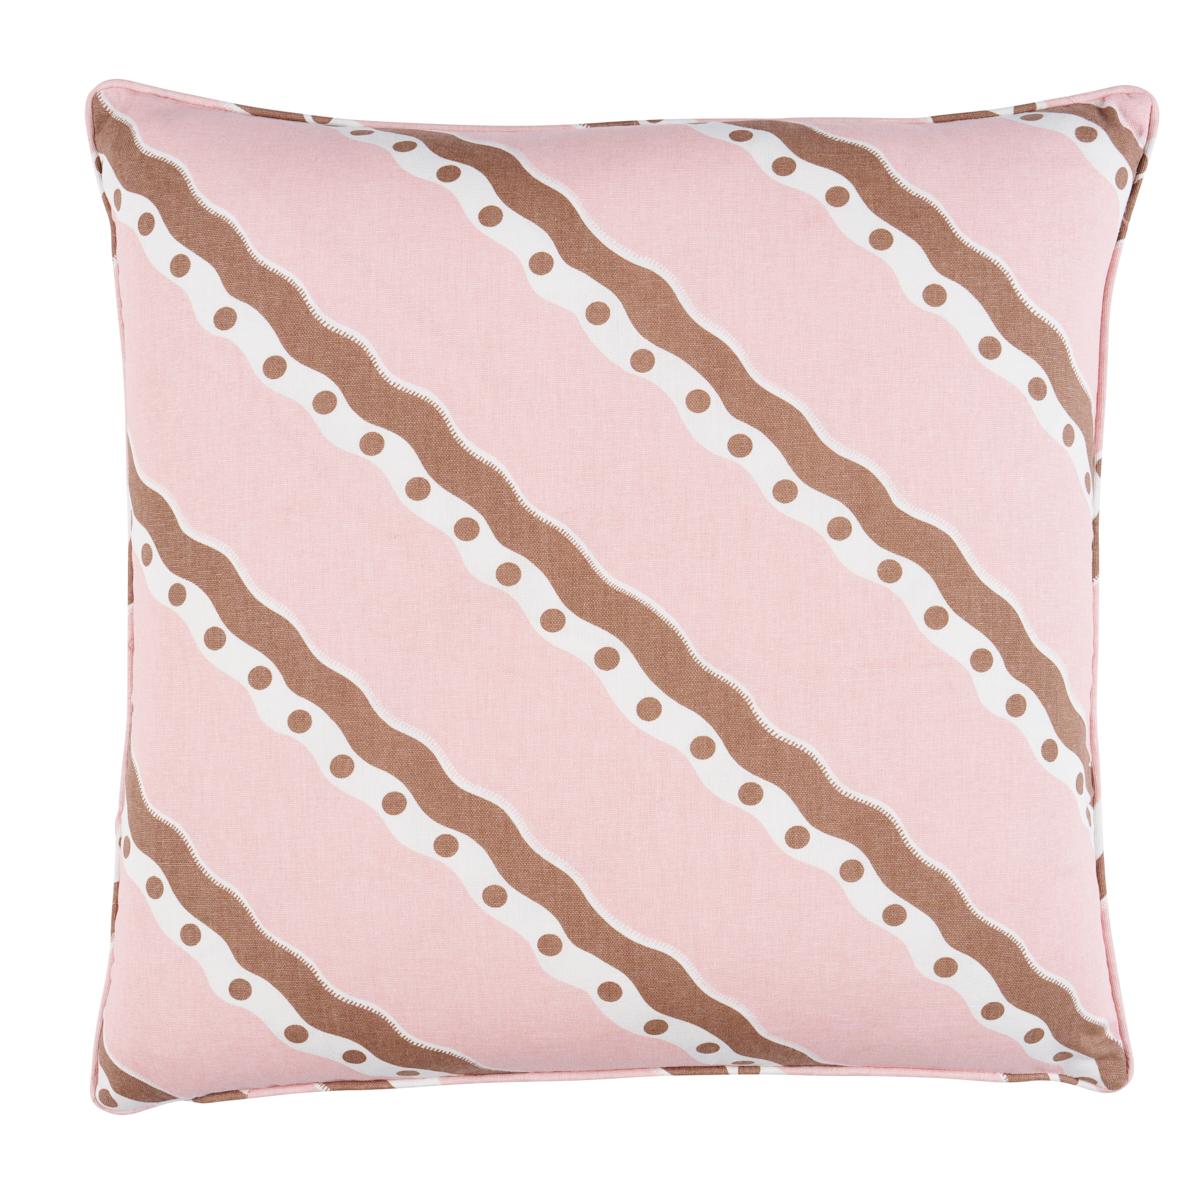 Rousseau Stripe Pillow in Cocoa & Blush 22 x 22" For Sale